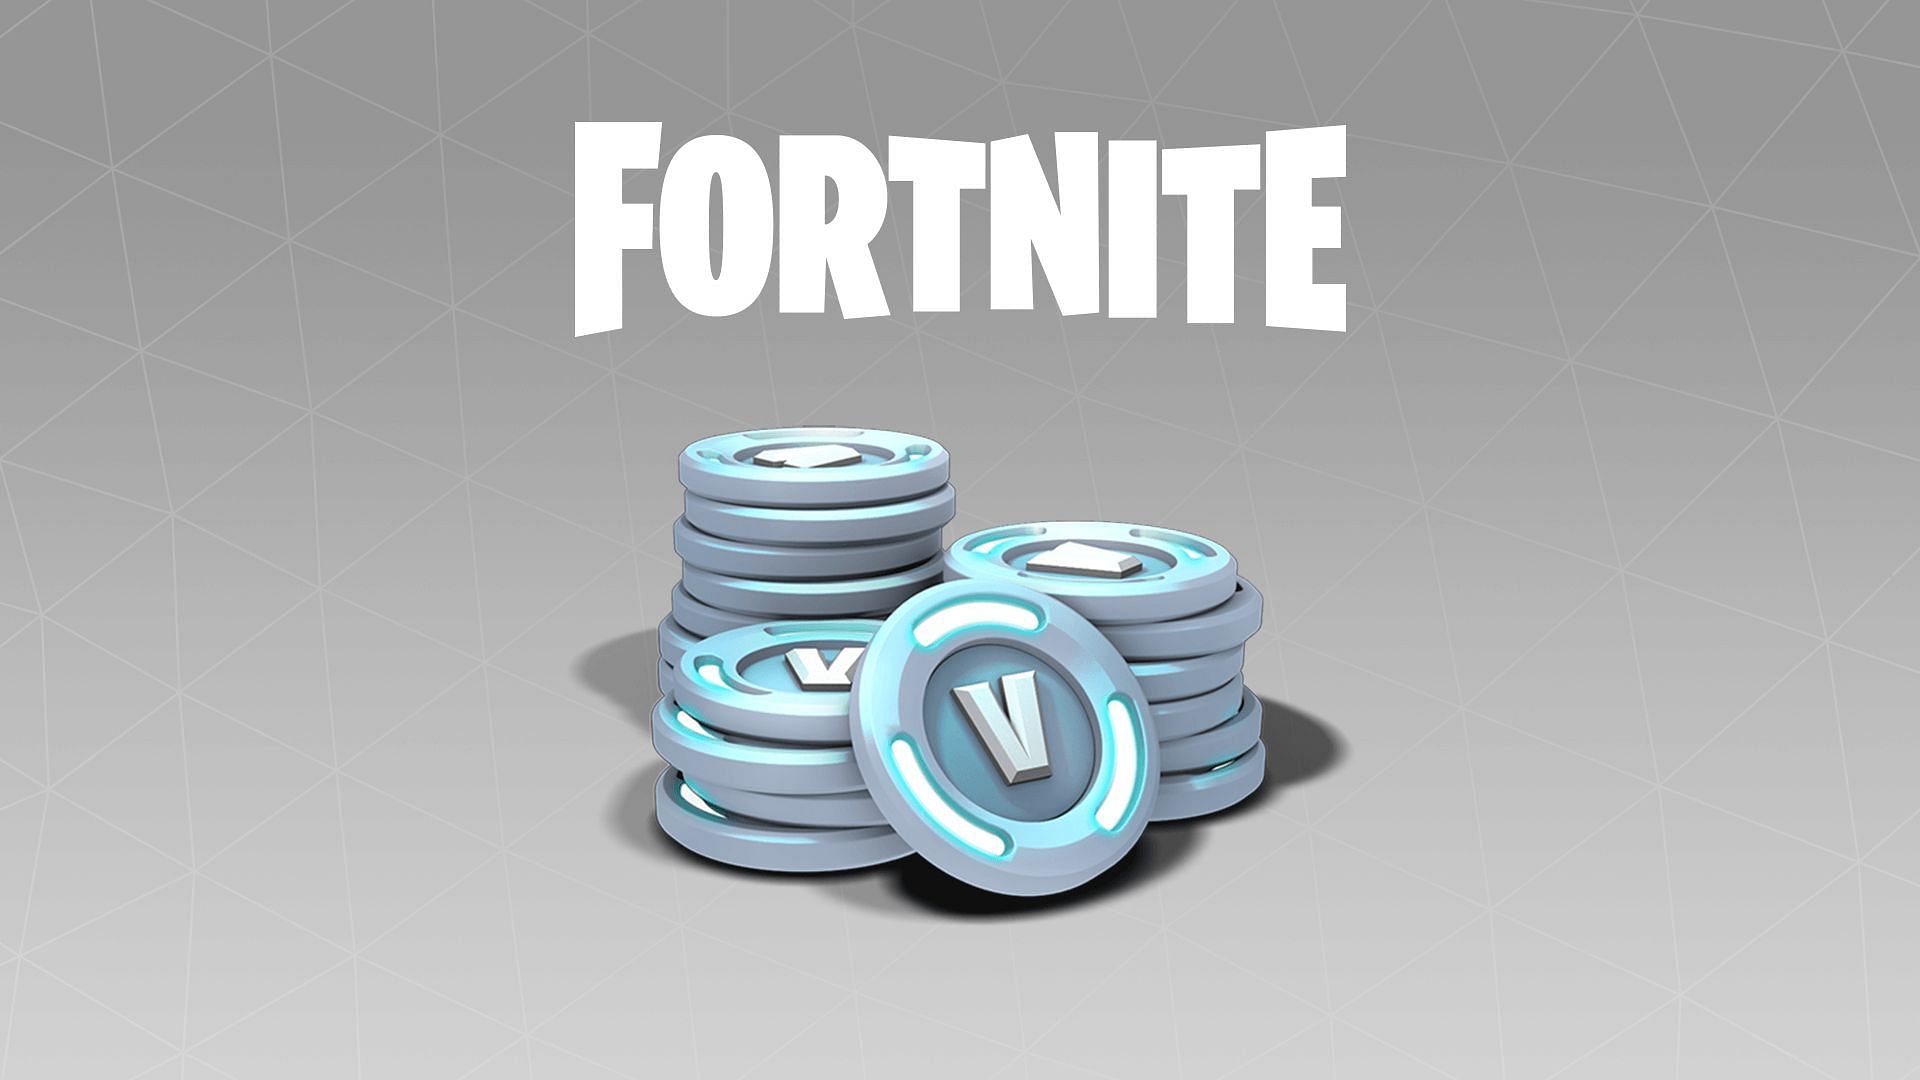 Fortnite cosmetic items cost millions of V-Bucks to purchase (Image via Epic Games)